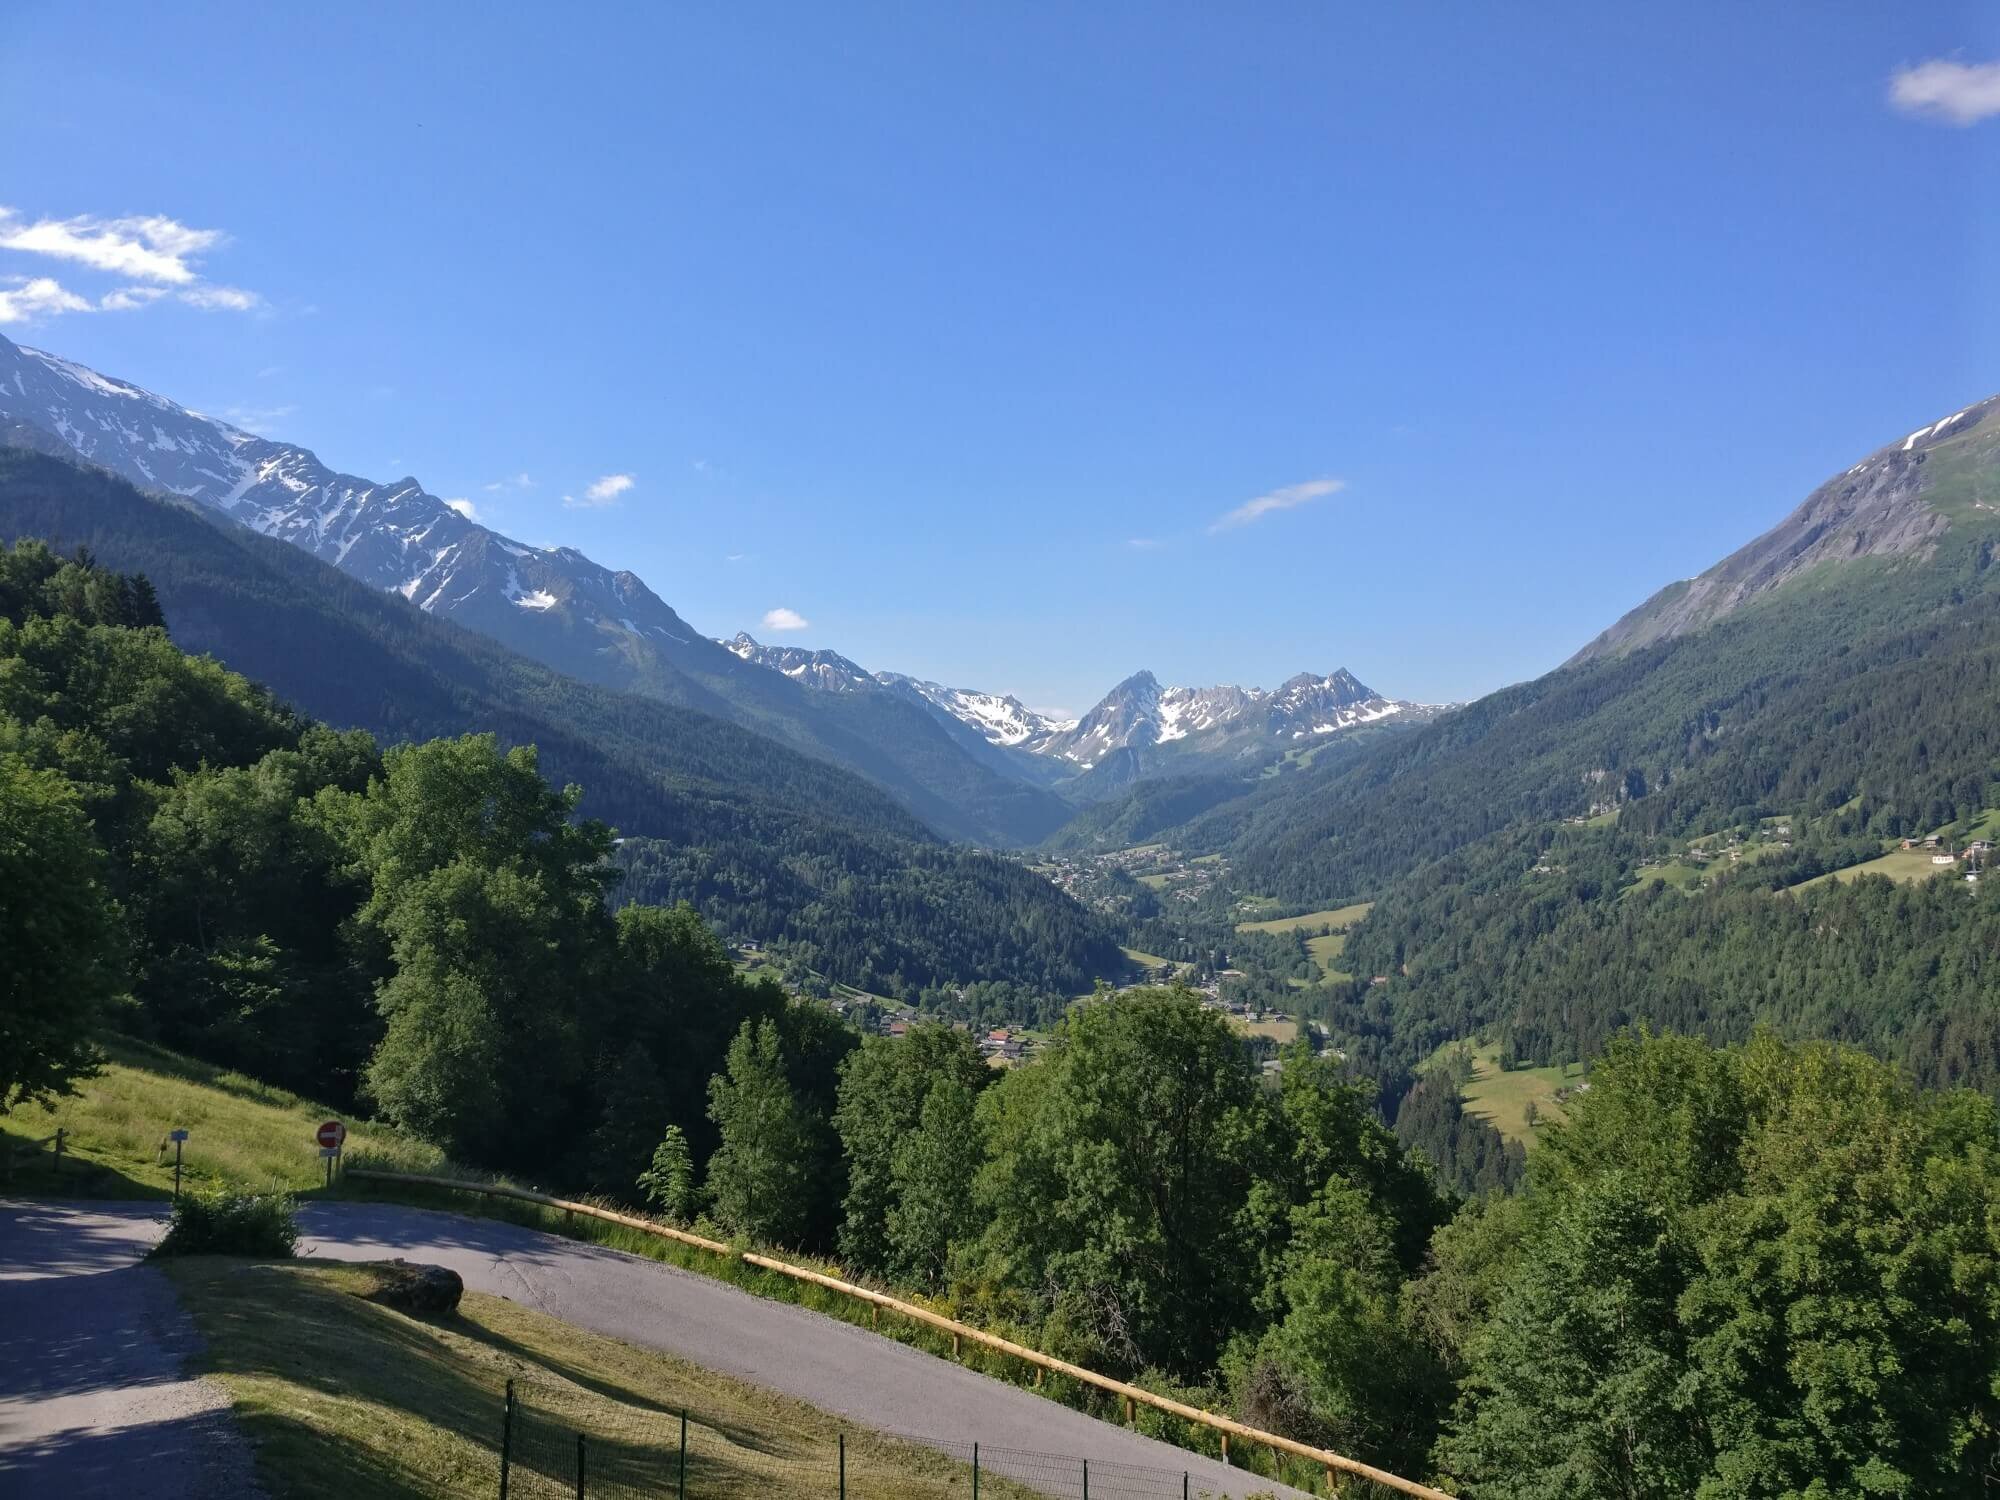 Looking up the valley towards Les Contamines Montjoie